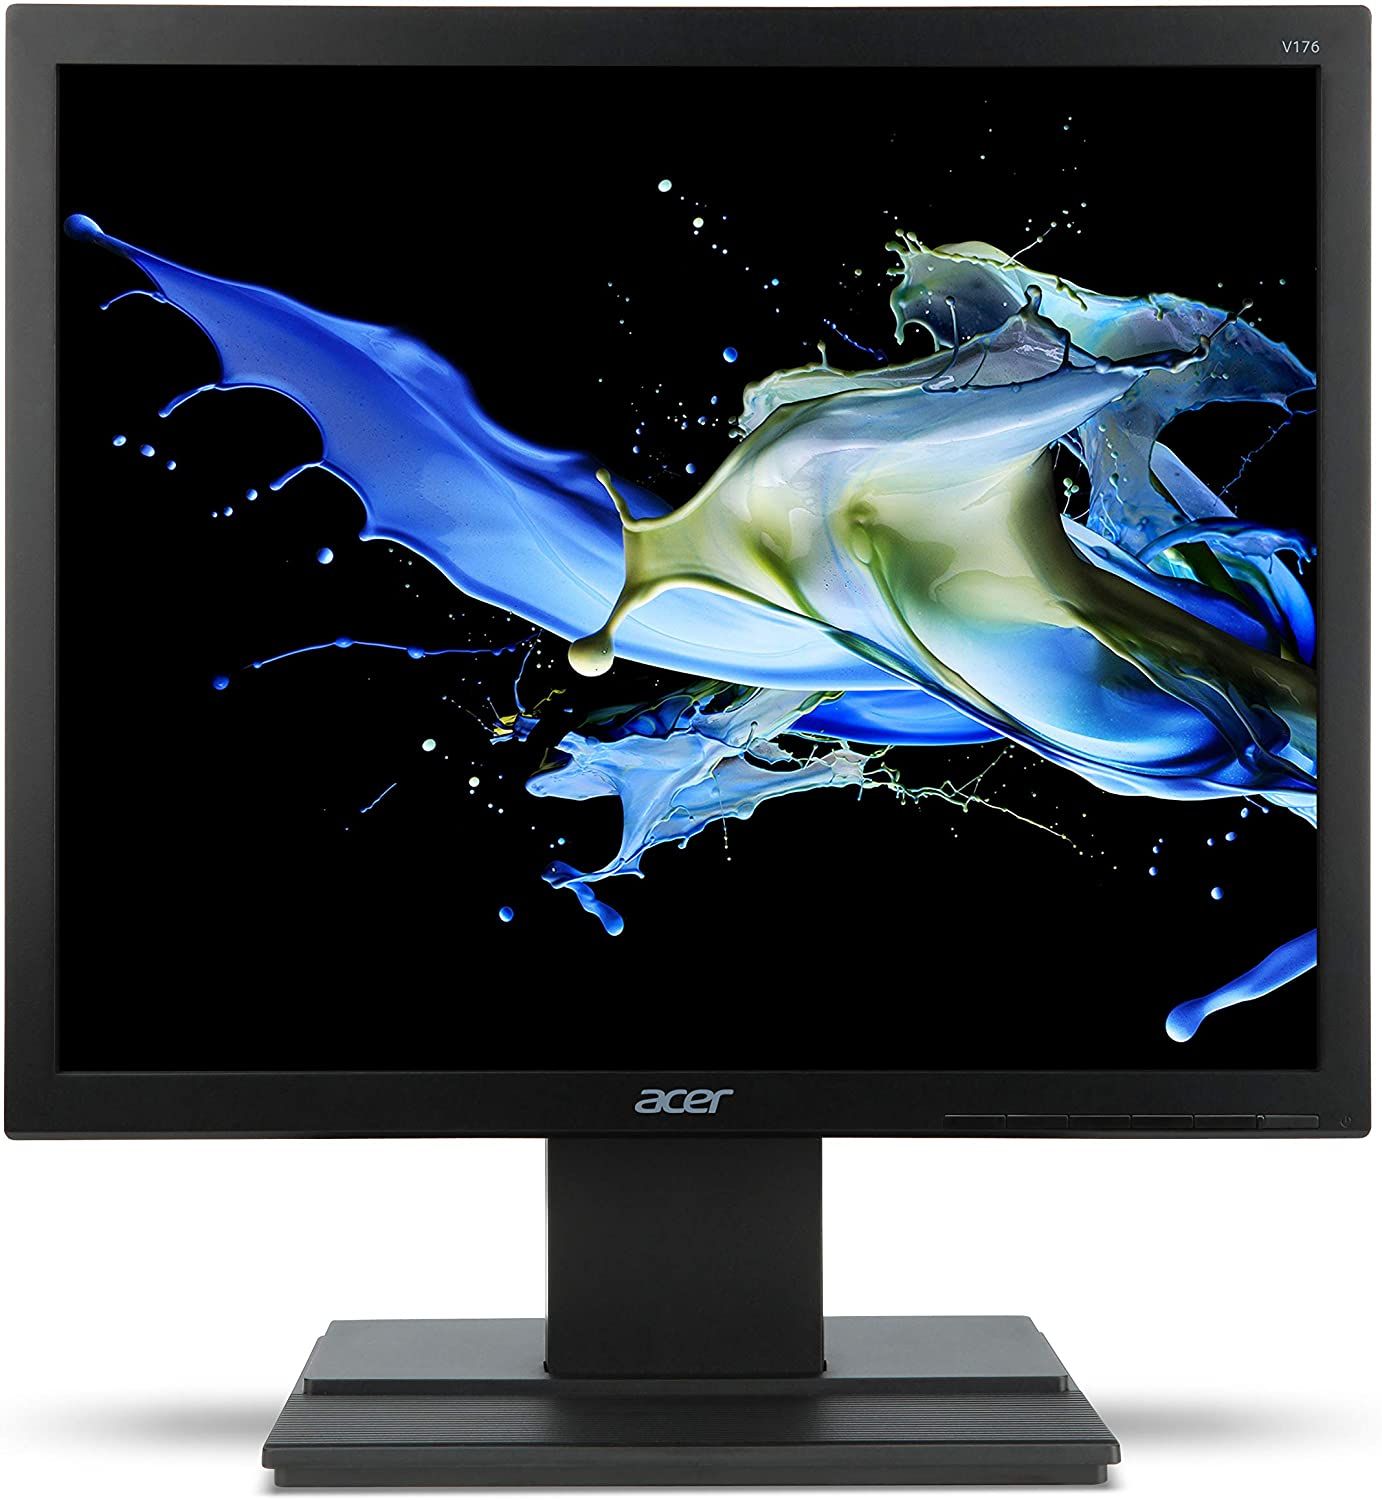 OUT6948 - Monitor Acer 17